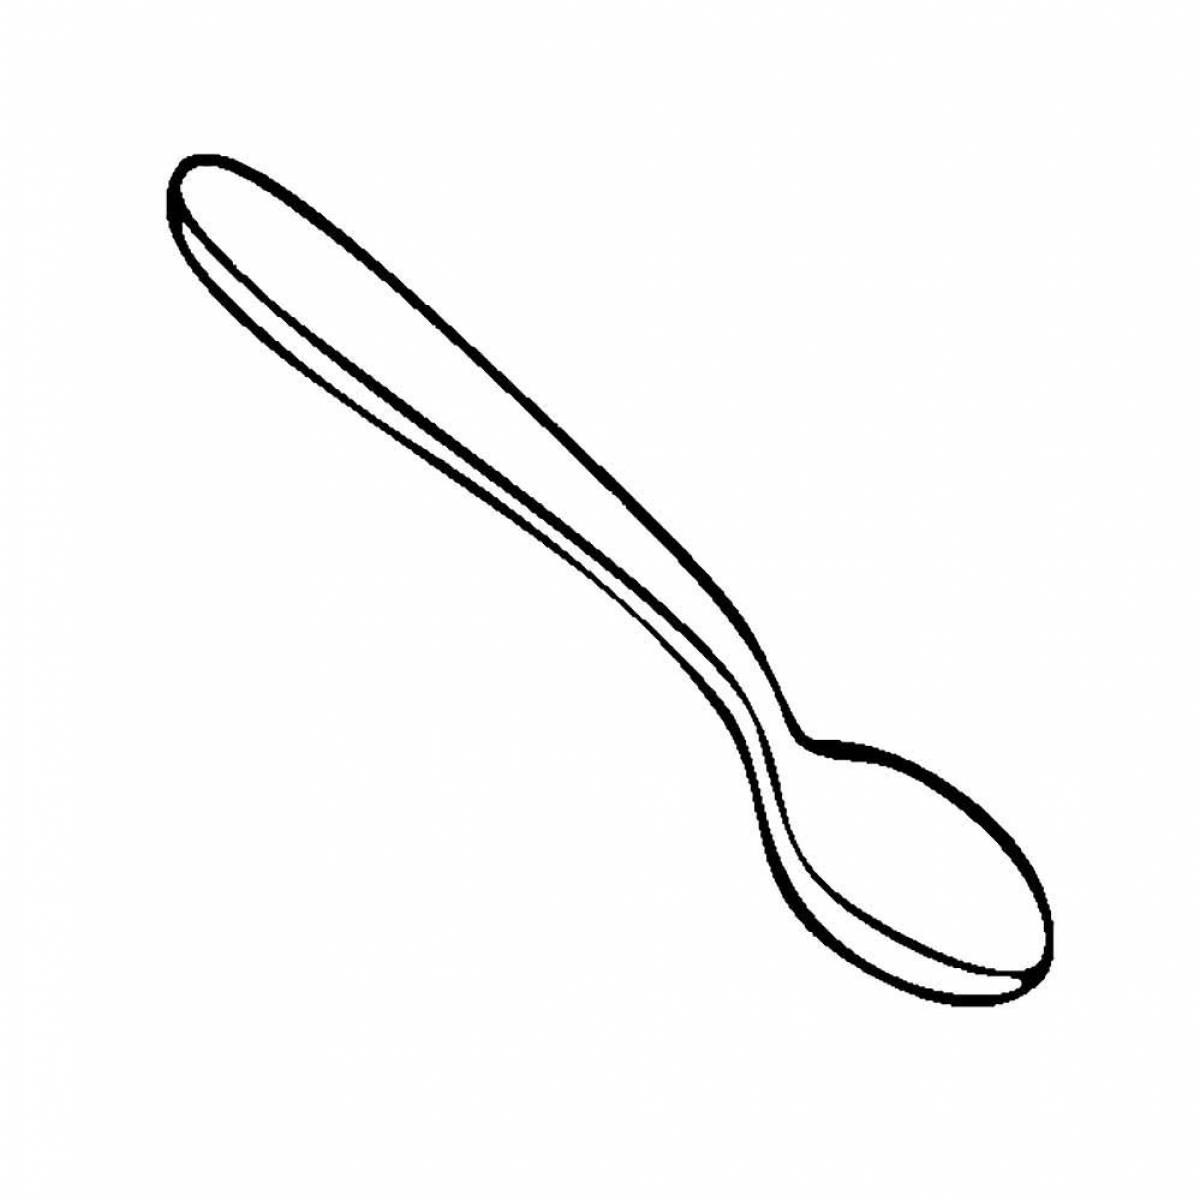 Spoon coloring page